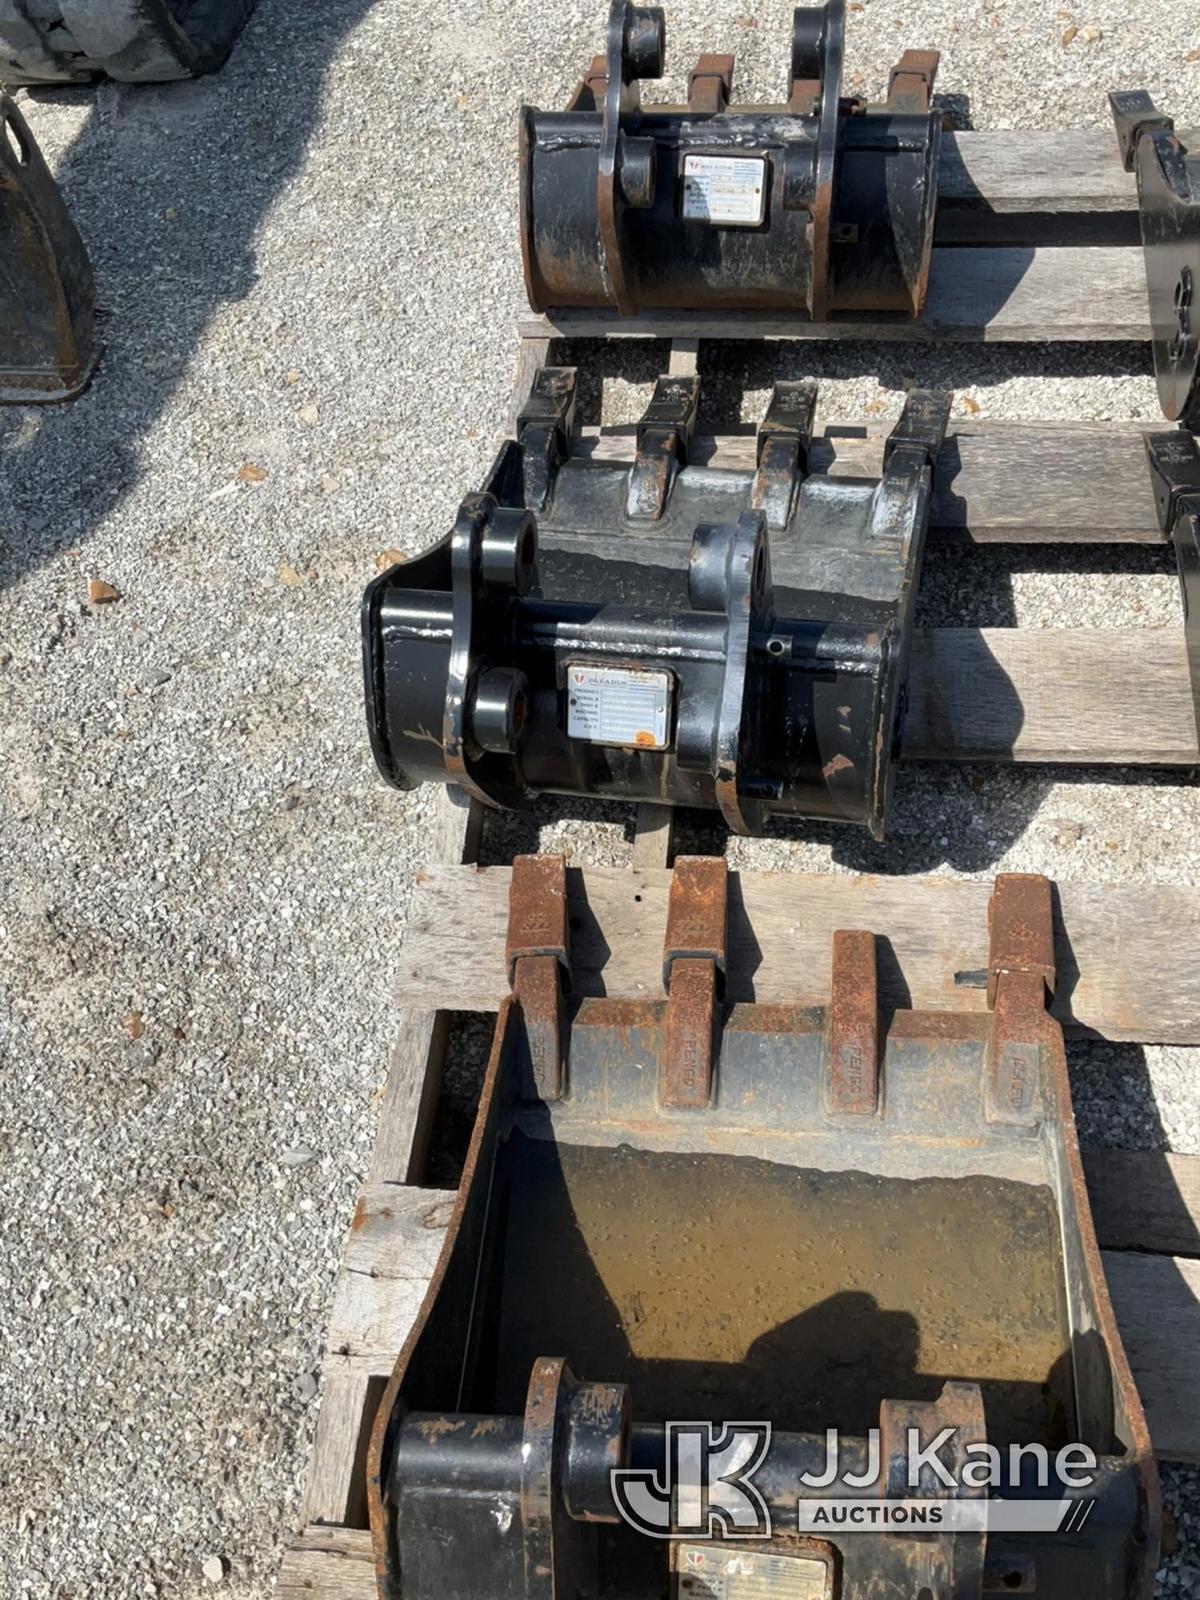 (Hawk Point, MO) 3 Paladin Buckets. (Used. ) NOTE: This unit is being sold AS IS/WHERE IS via Timed